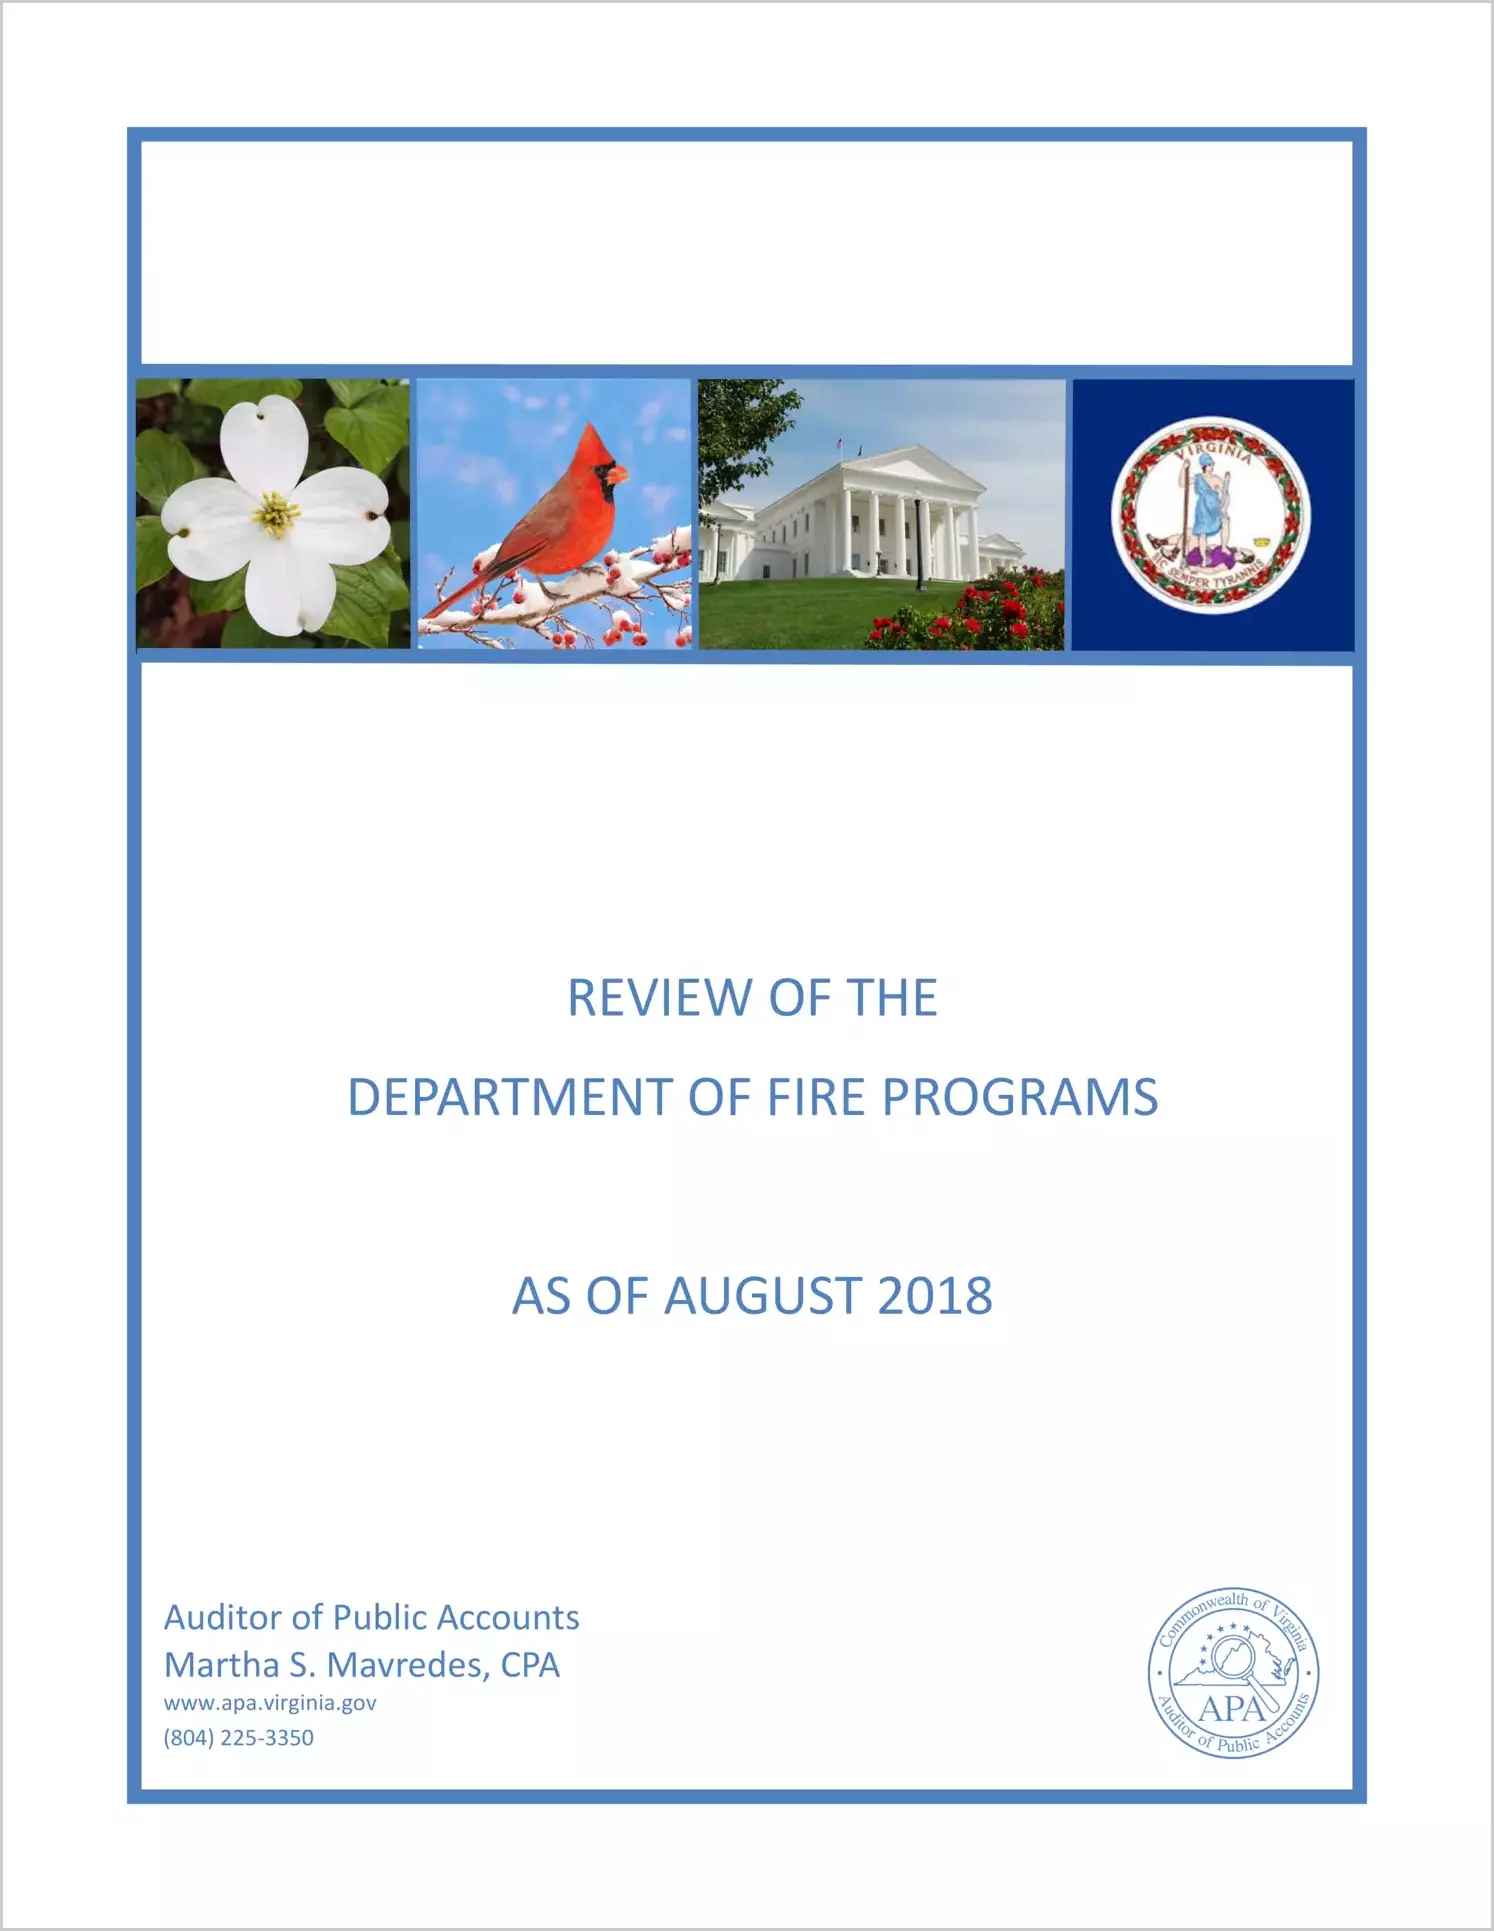 Review of the Department of Fire Programs as of August 2018